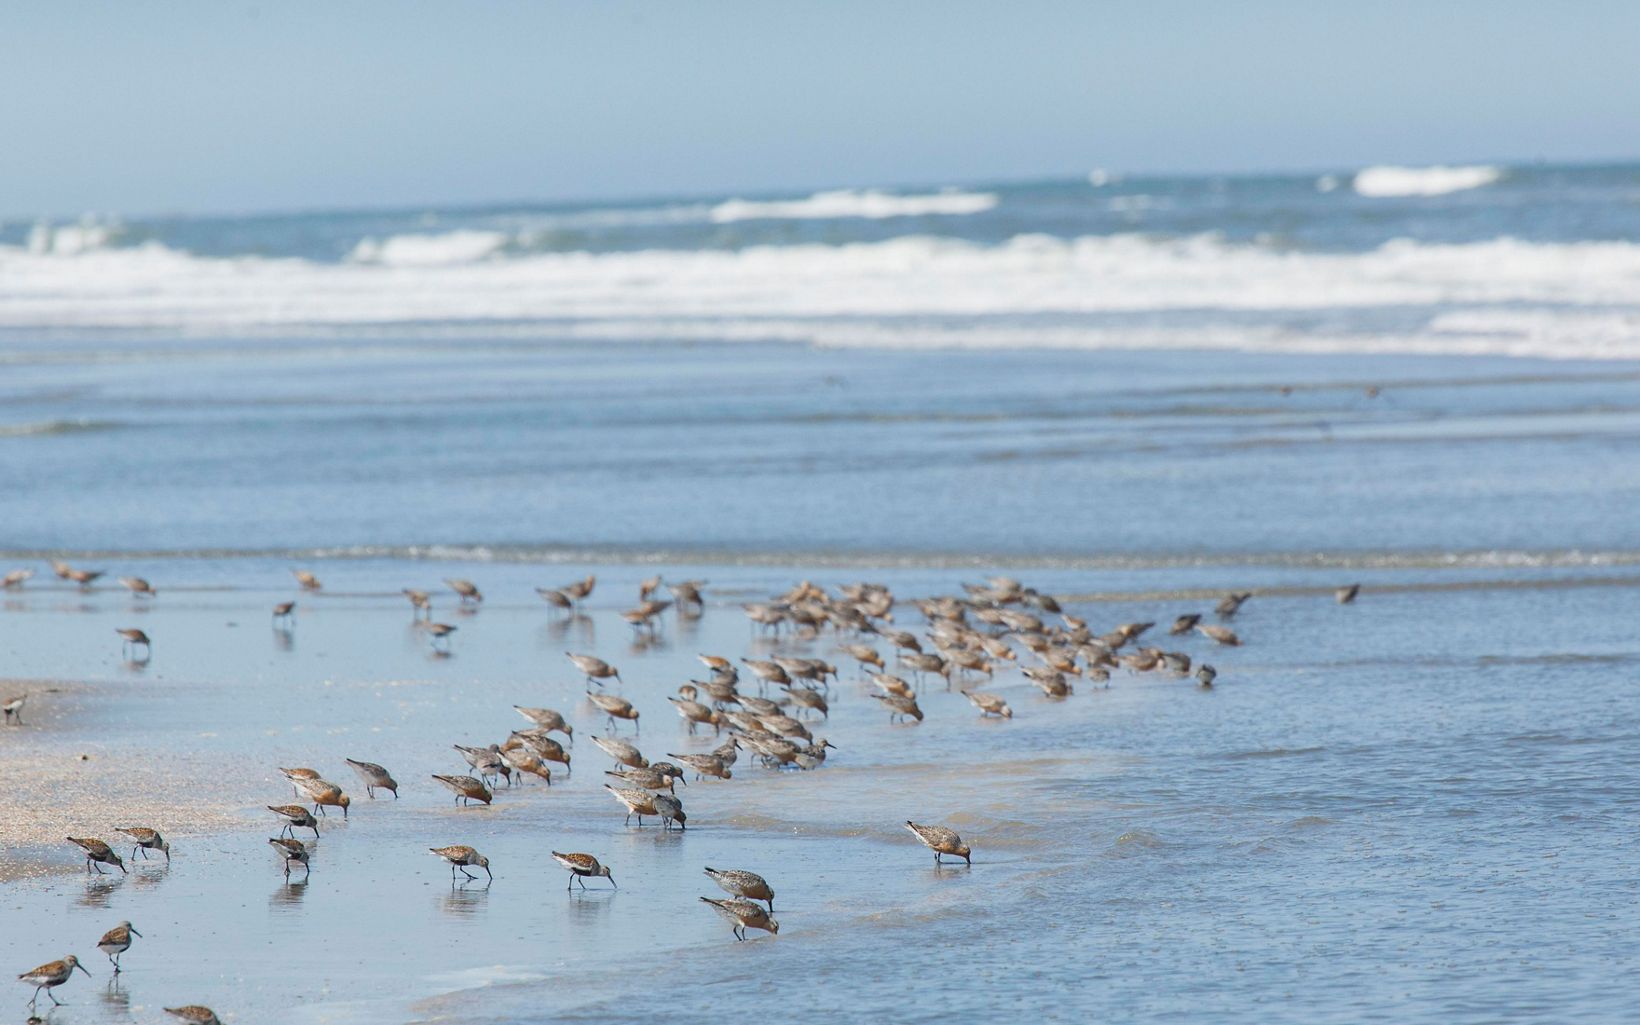 Small brown and white shorebirds poke their beaks into the sand at the edge of the Atlantic Ocean while water from the receding waves swirls around them.